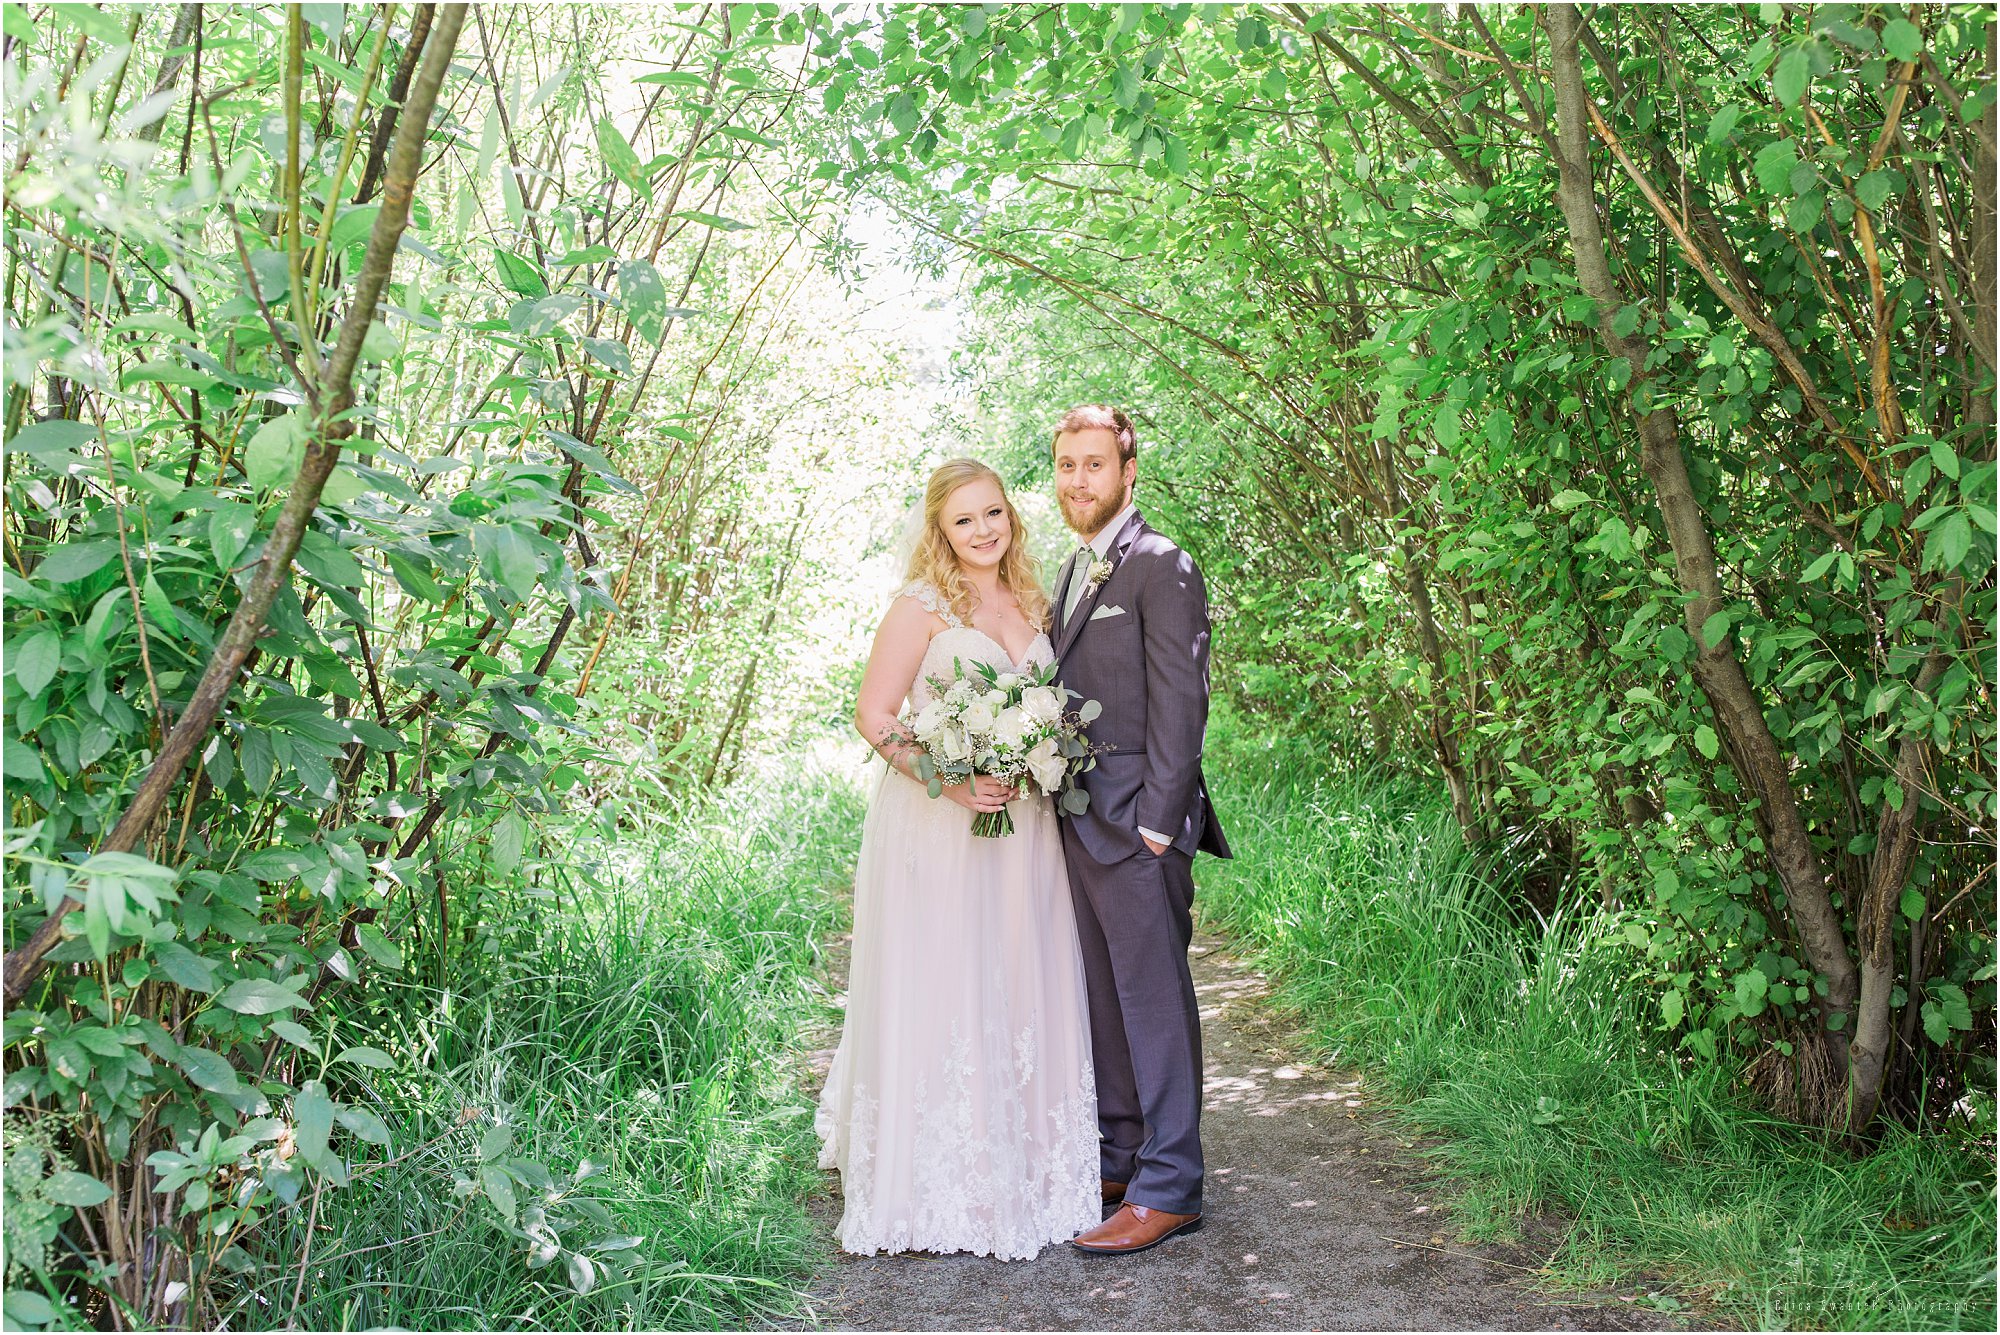 A beautiful natural green archway creates pretty portraits for the happy wedding couple in Bend, OR. | Erica Swantek Photography